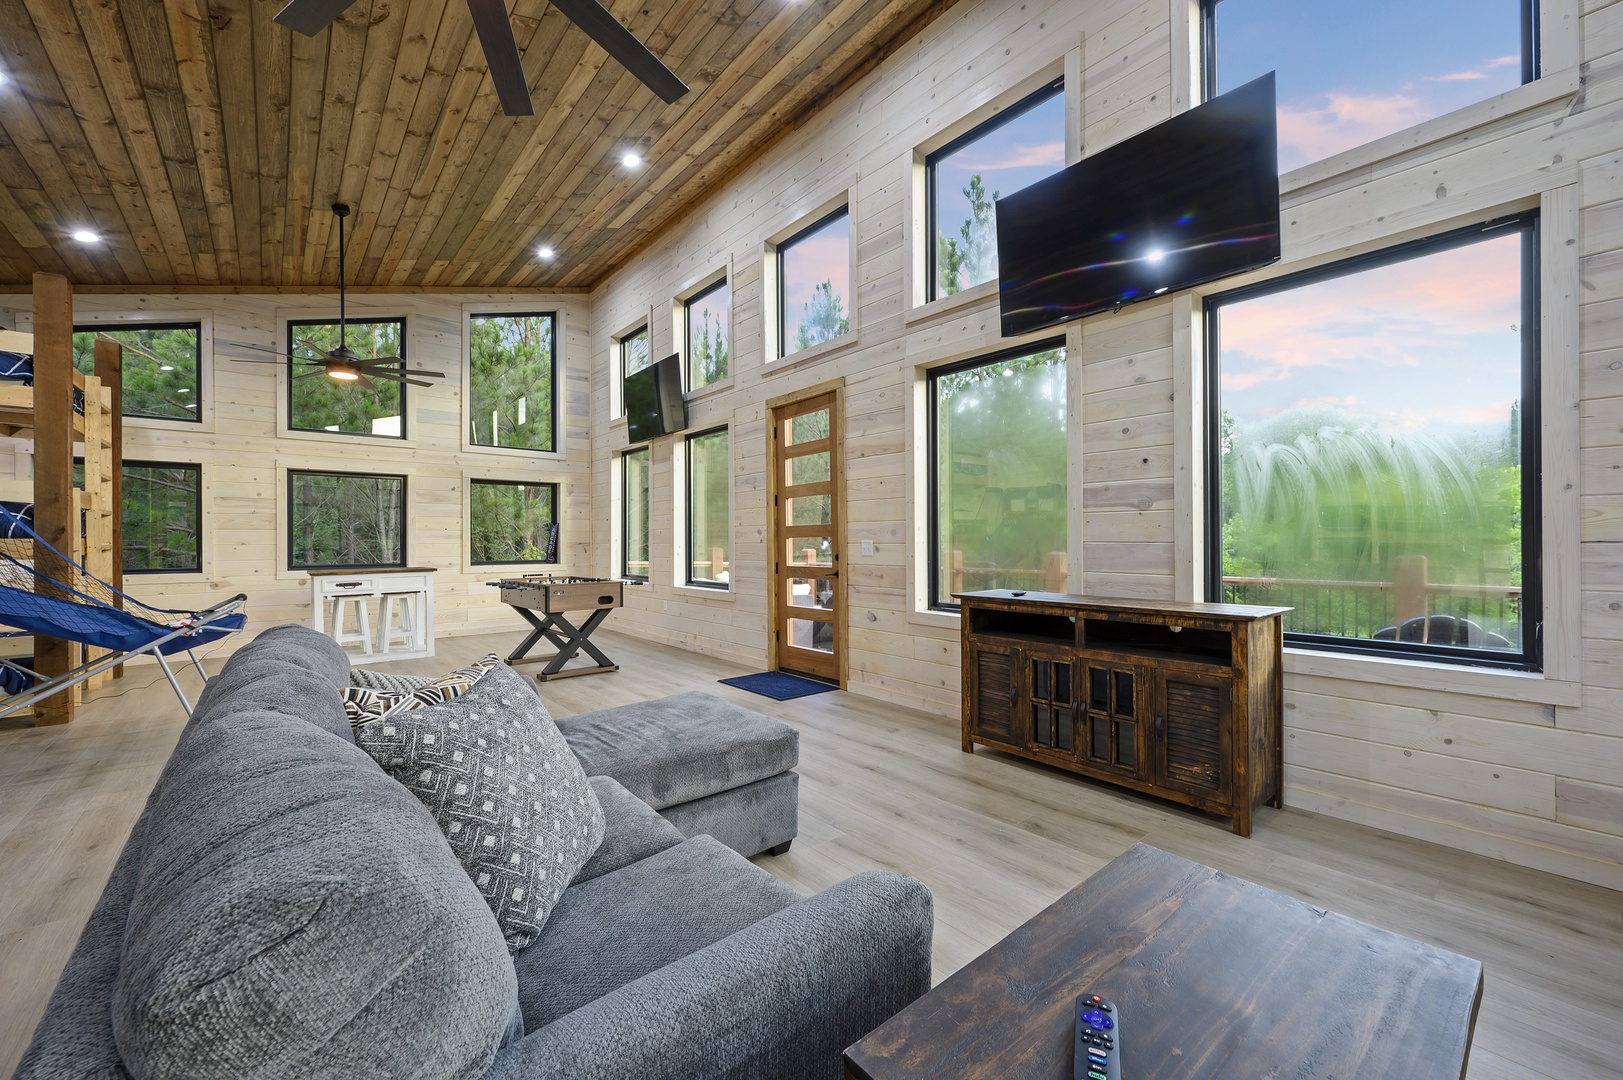 Floor-to-ceiling windows provide beautiful forest views